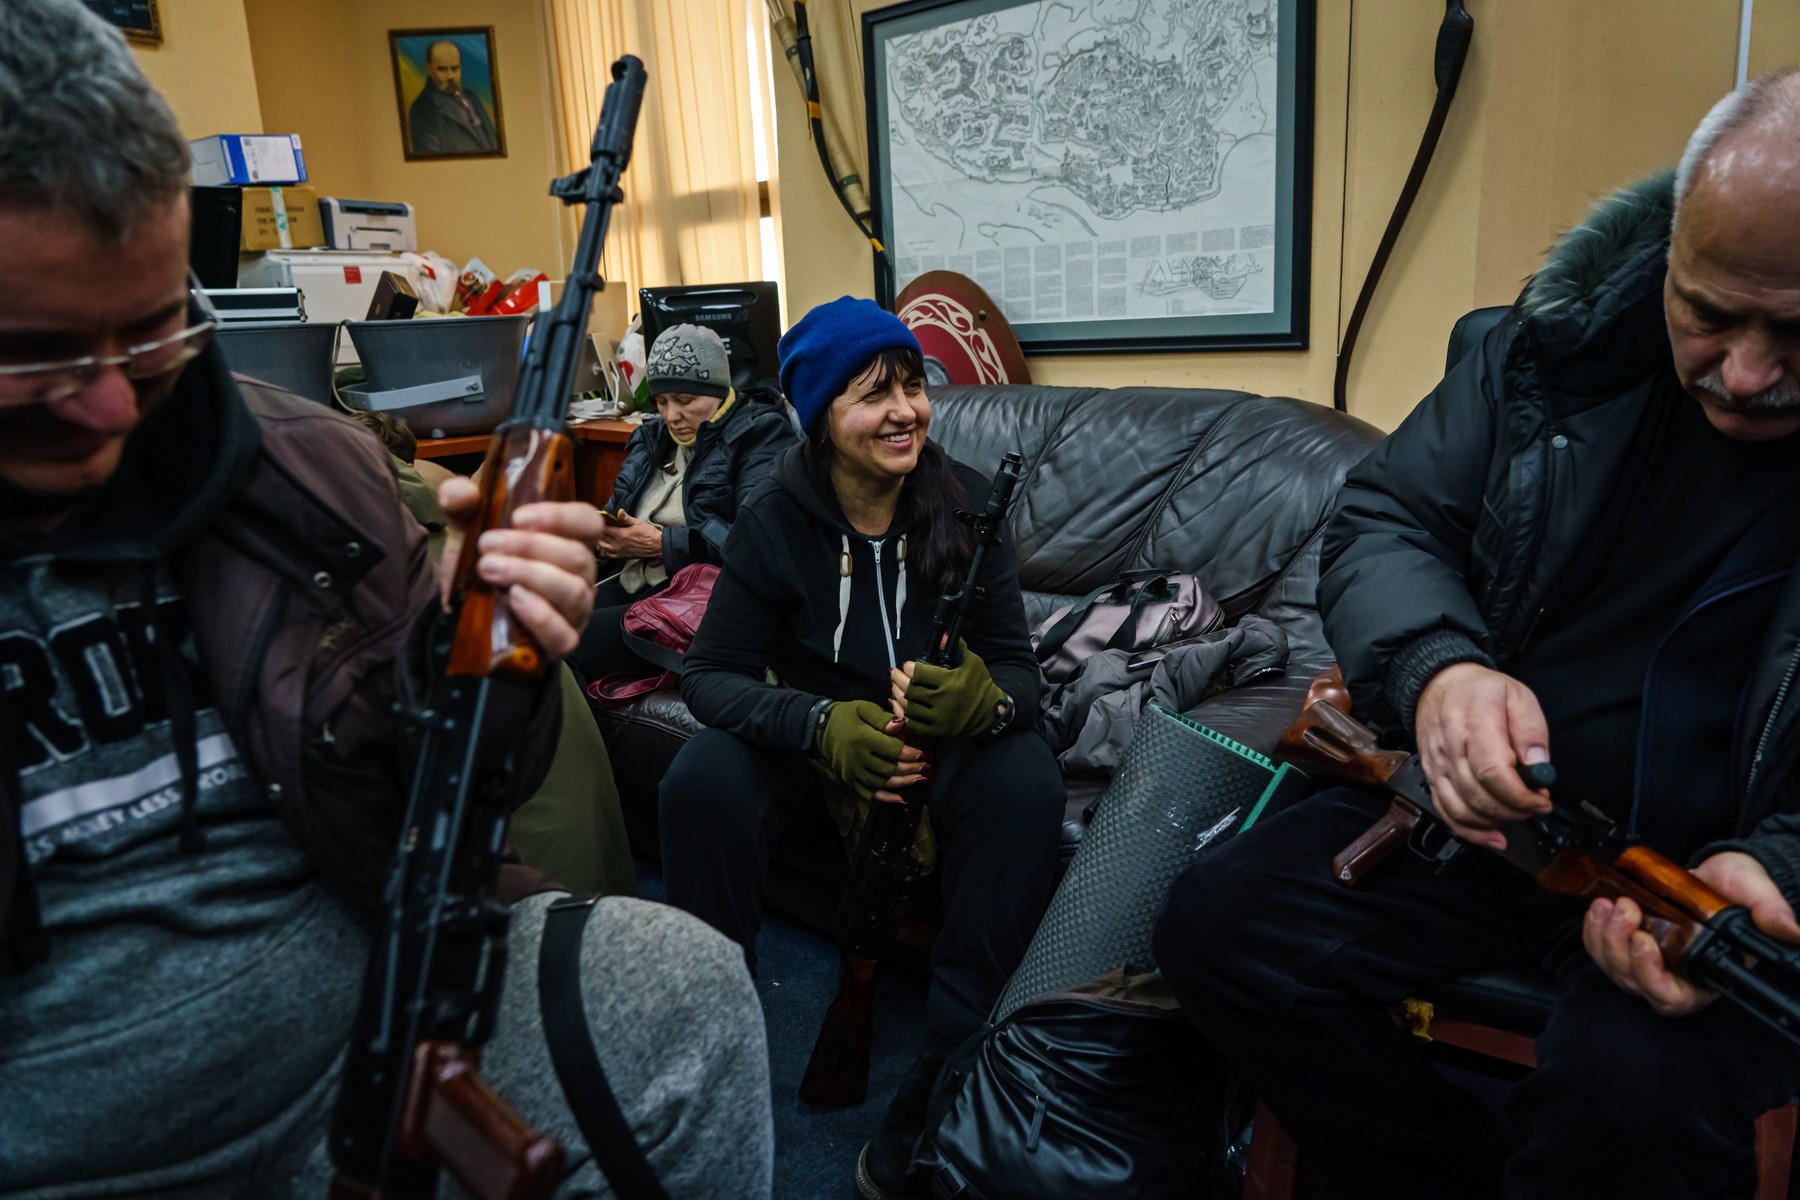 Volunteers from the Territorial Defense Units gather in an outpost to collect weapons, train and get their assignments in Kyiv, Ukraine, Saturday, Feb. 26, 2022. (MARCUS YAM / LOS ANGELES TIMES)
UKRAINE RUSSIA CRISIS, Kyiv, Kyiv Oblast, Ukraine - 26 Feb 2022,Image: 665267703, License: Rights-managed, Restrictions: , Model Release: no, Credit line: Profimedia